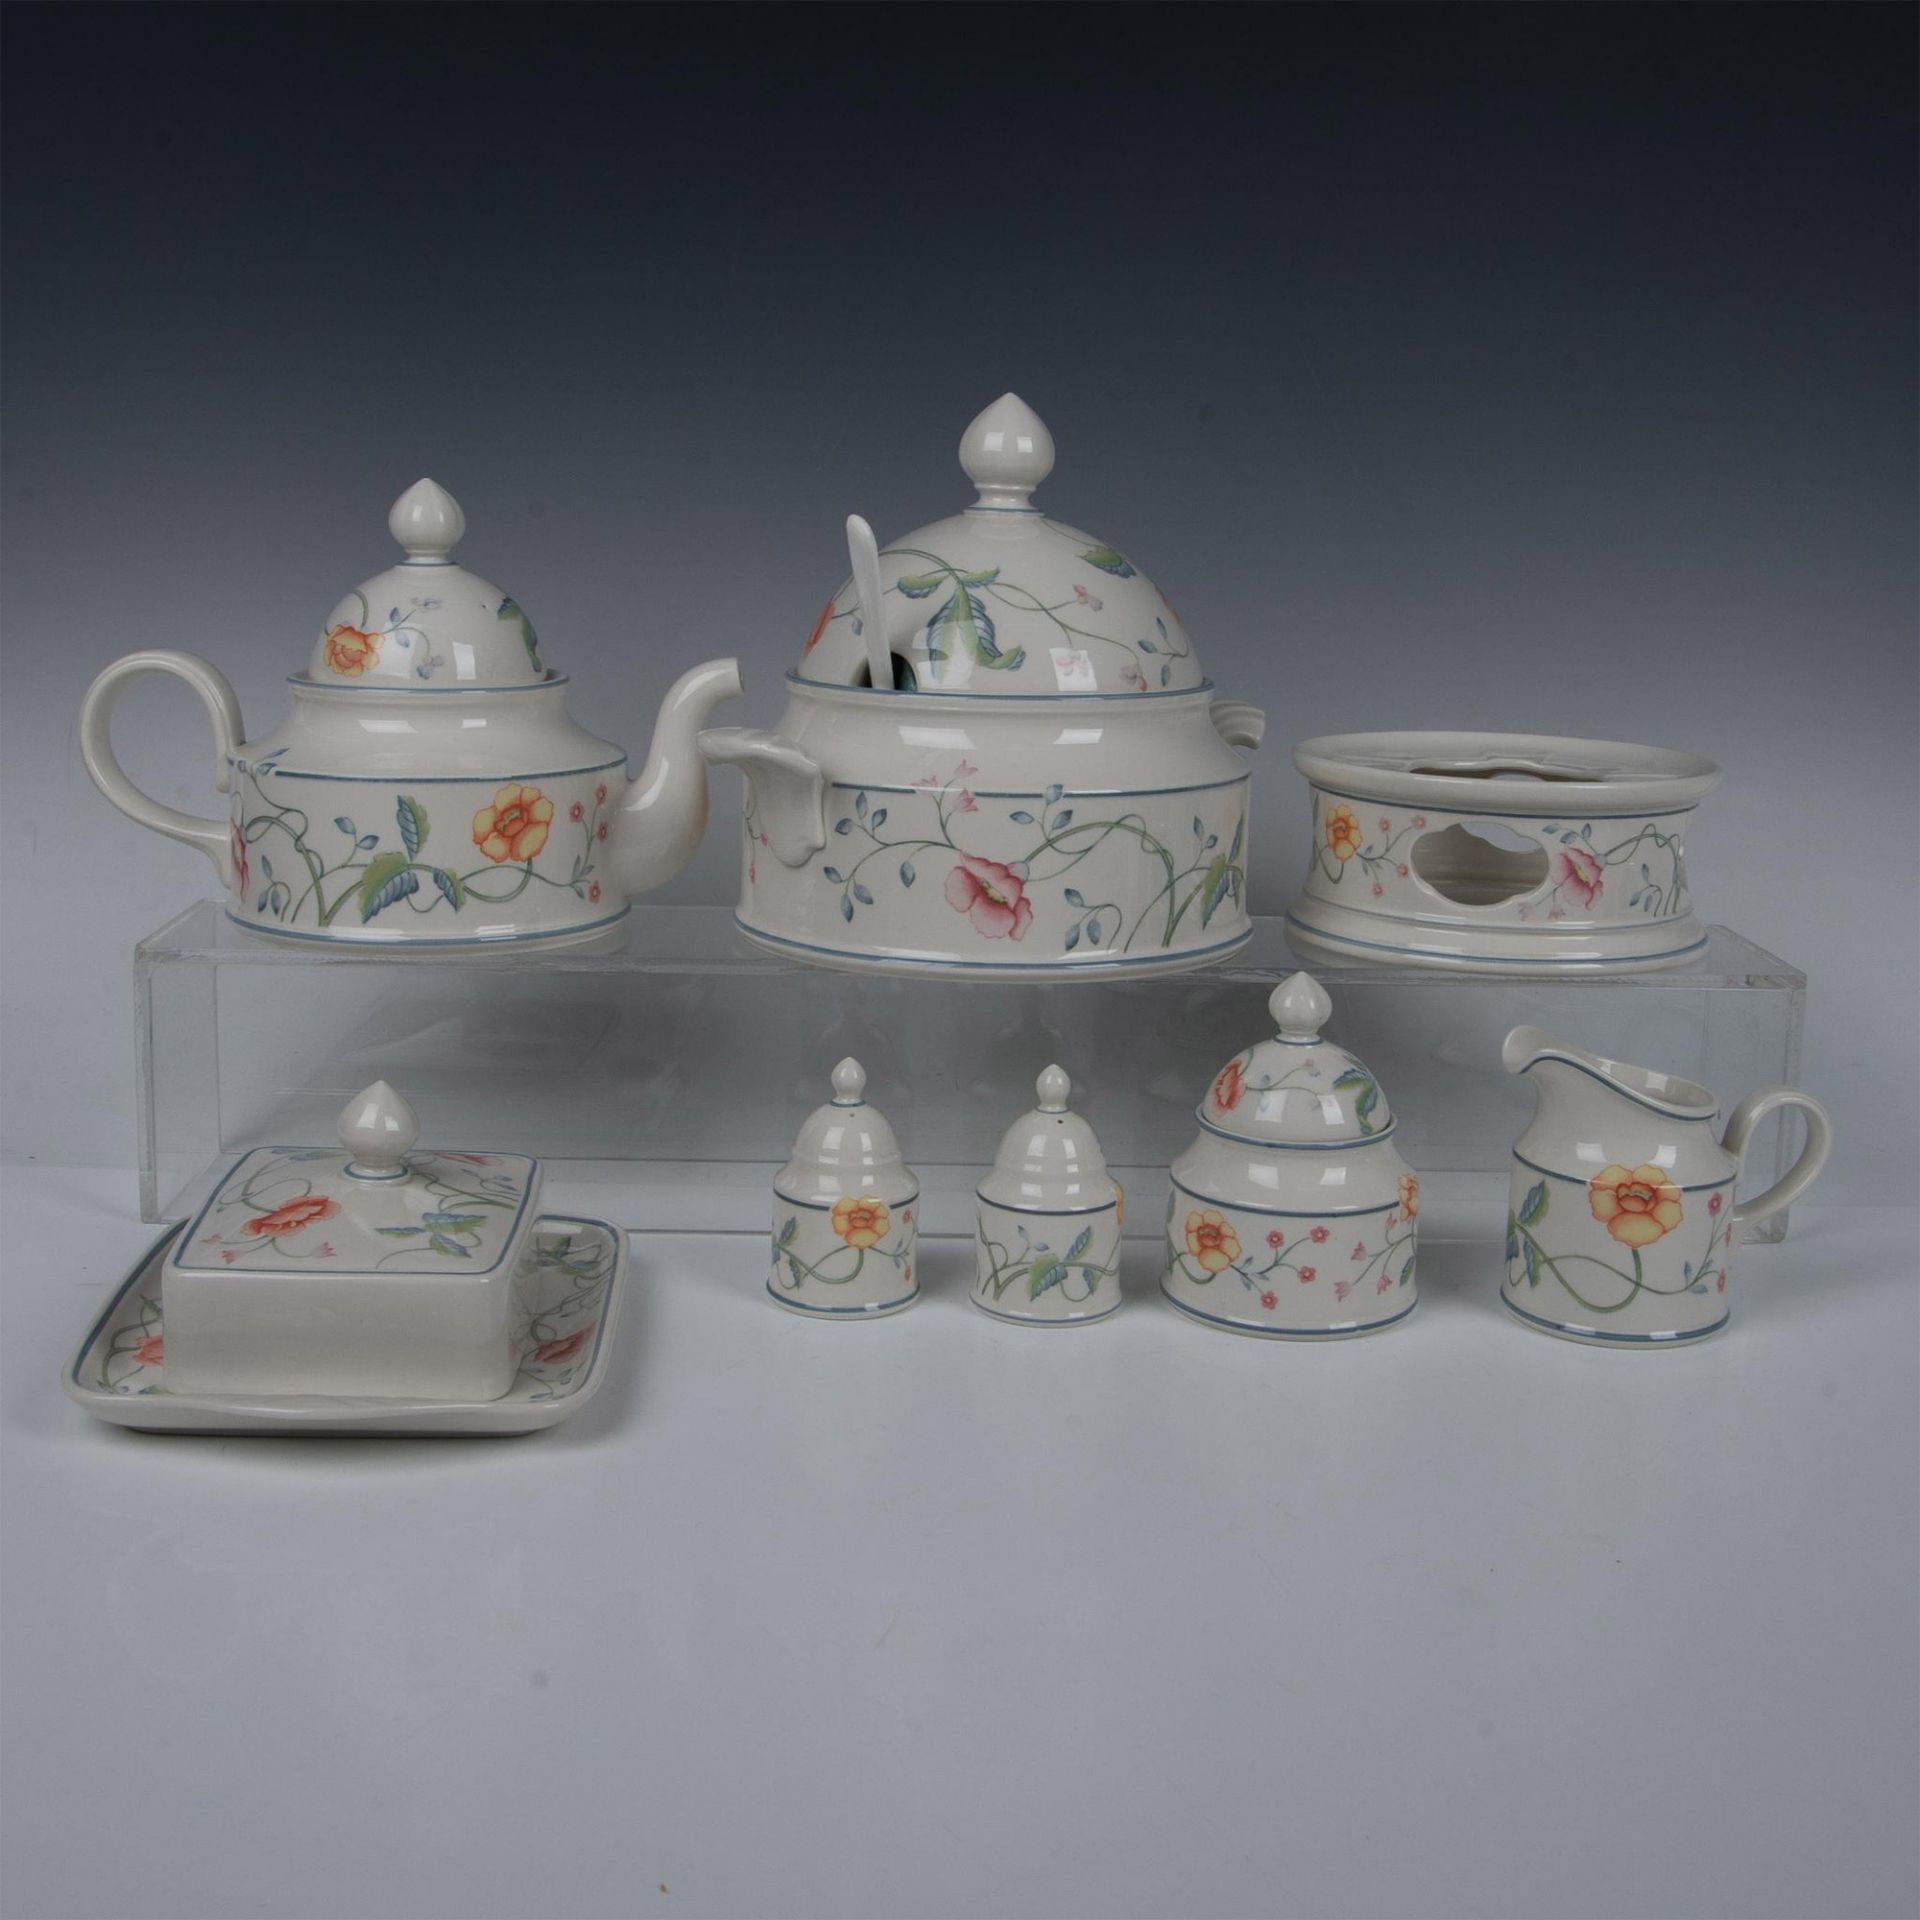 7pc Villeroy and Boch Tableware Grouping, Albertina Pattern - Image 2 of 9